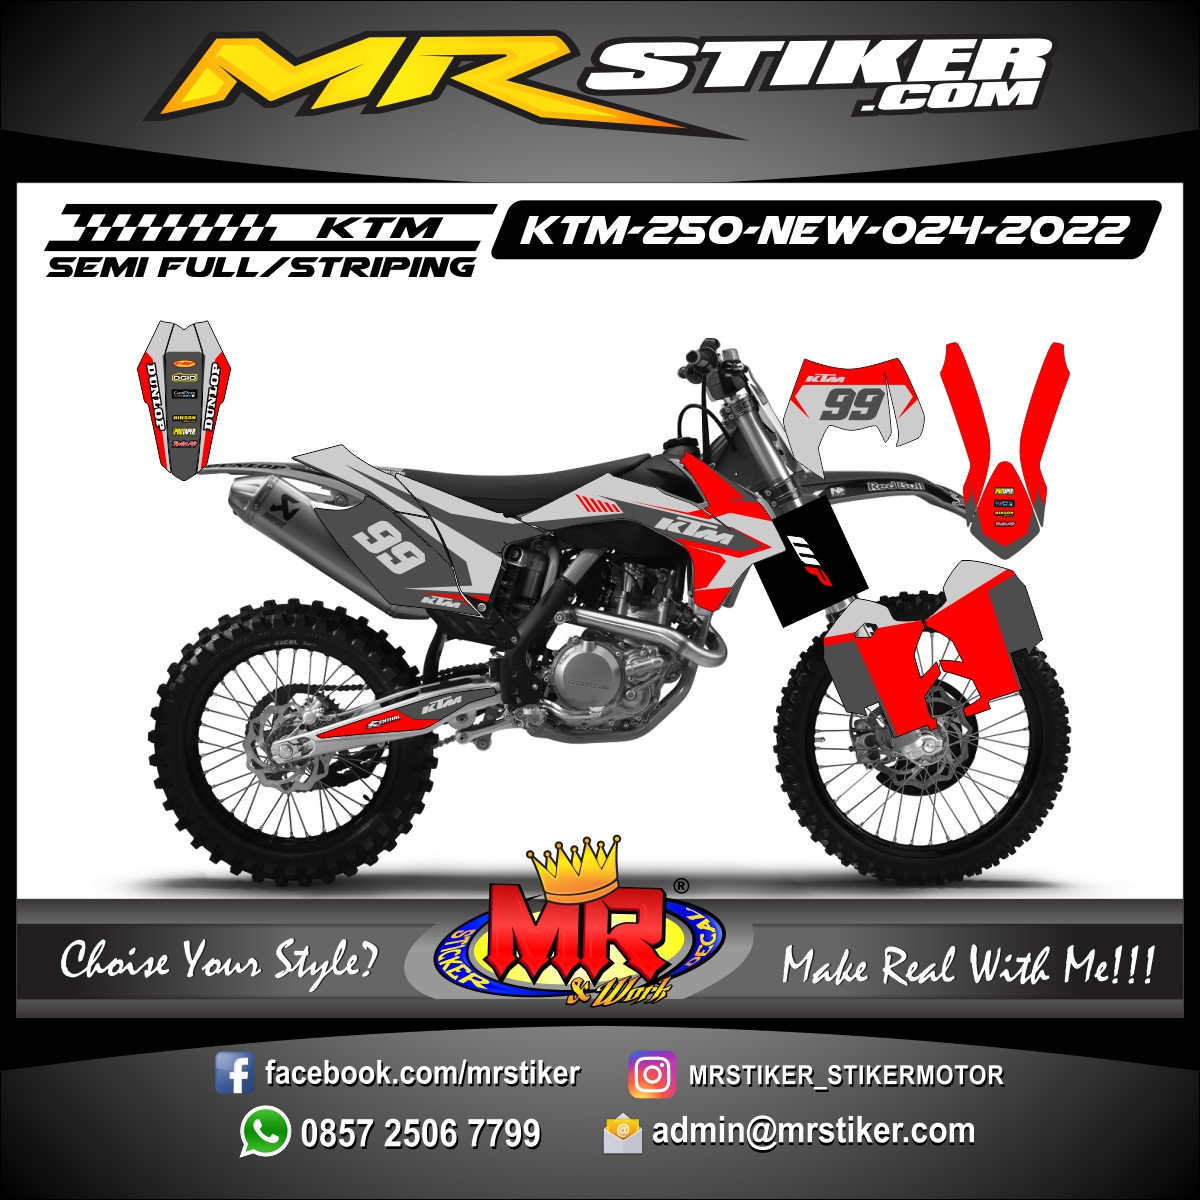 Stiker motor decal KTM 250 New Grey Red Line SuperMoto Tracker Decal